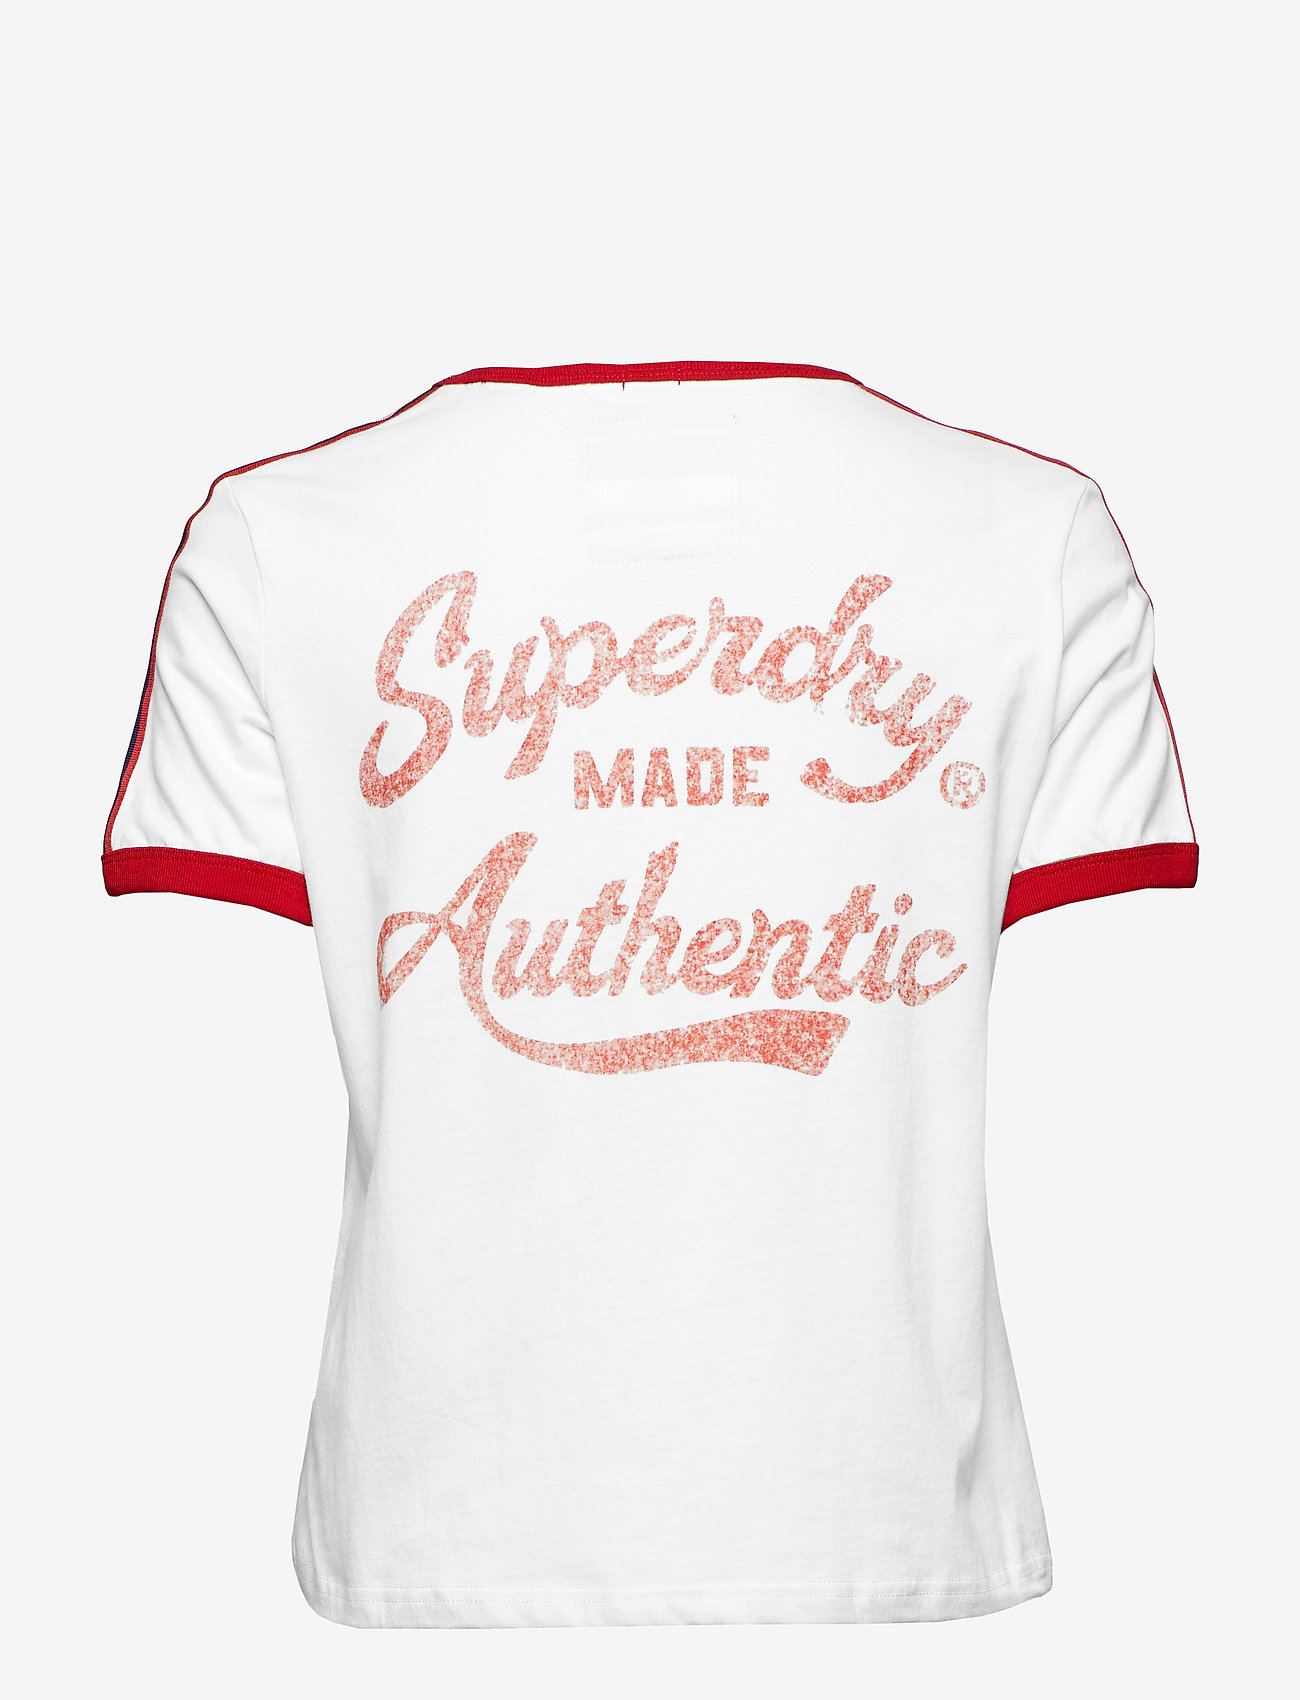 Superdry - HERITAGE EMBROIDERY RINGER BOXY TEE - winter white - 1